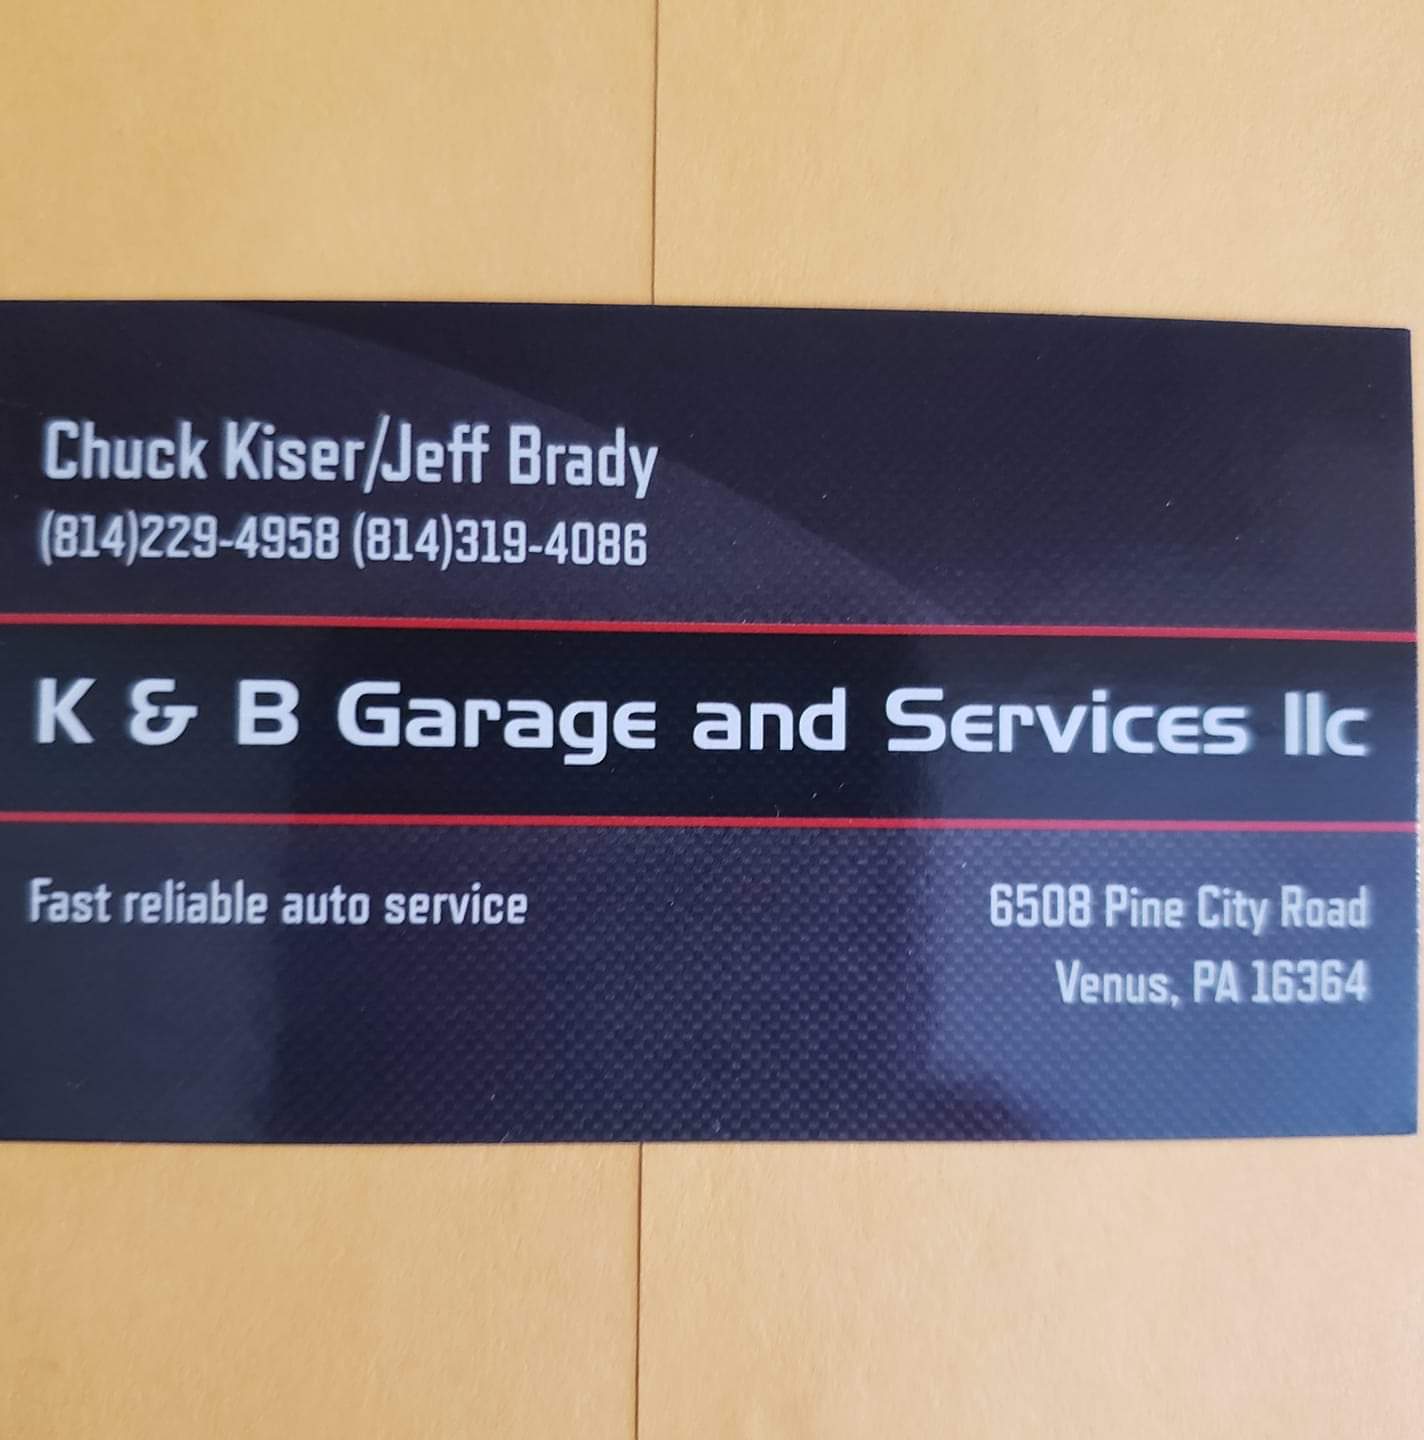 K and B Garage and Services LLC